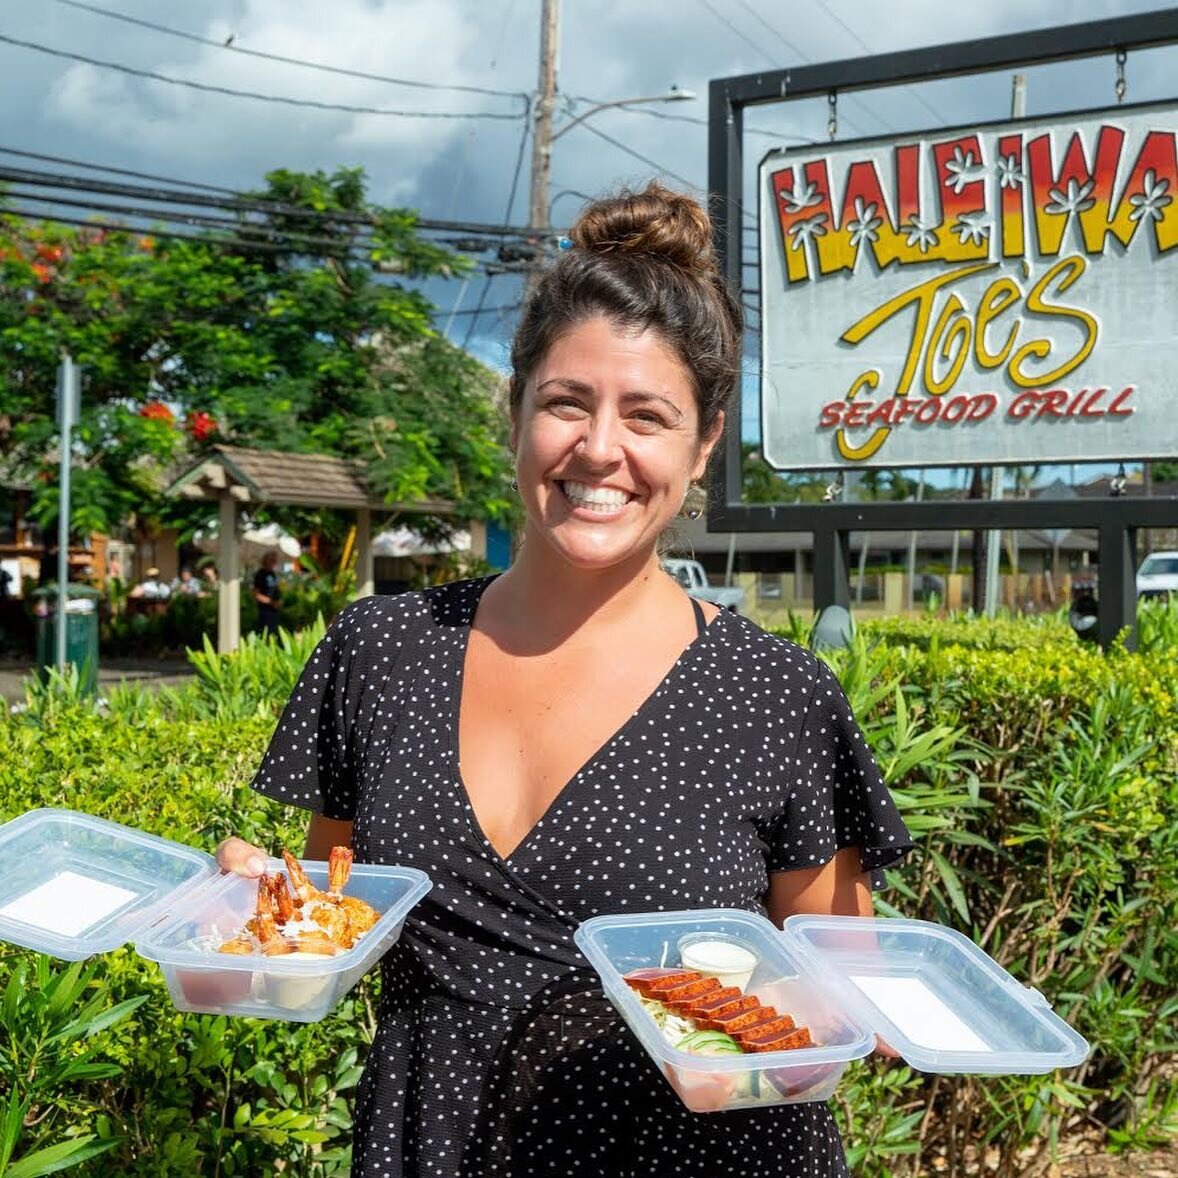 Restaurant partner spotlight: @haleiwajoes! 
✨
Haleʻiwa Joes was the very first restaurant to join our program, and they are eager to make a difference🌱! Mahalo nui to the HJs team for your early support! 

Order one of their mouth-watering dishes i